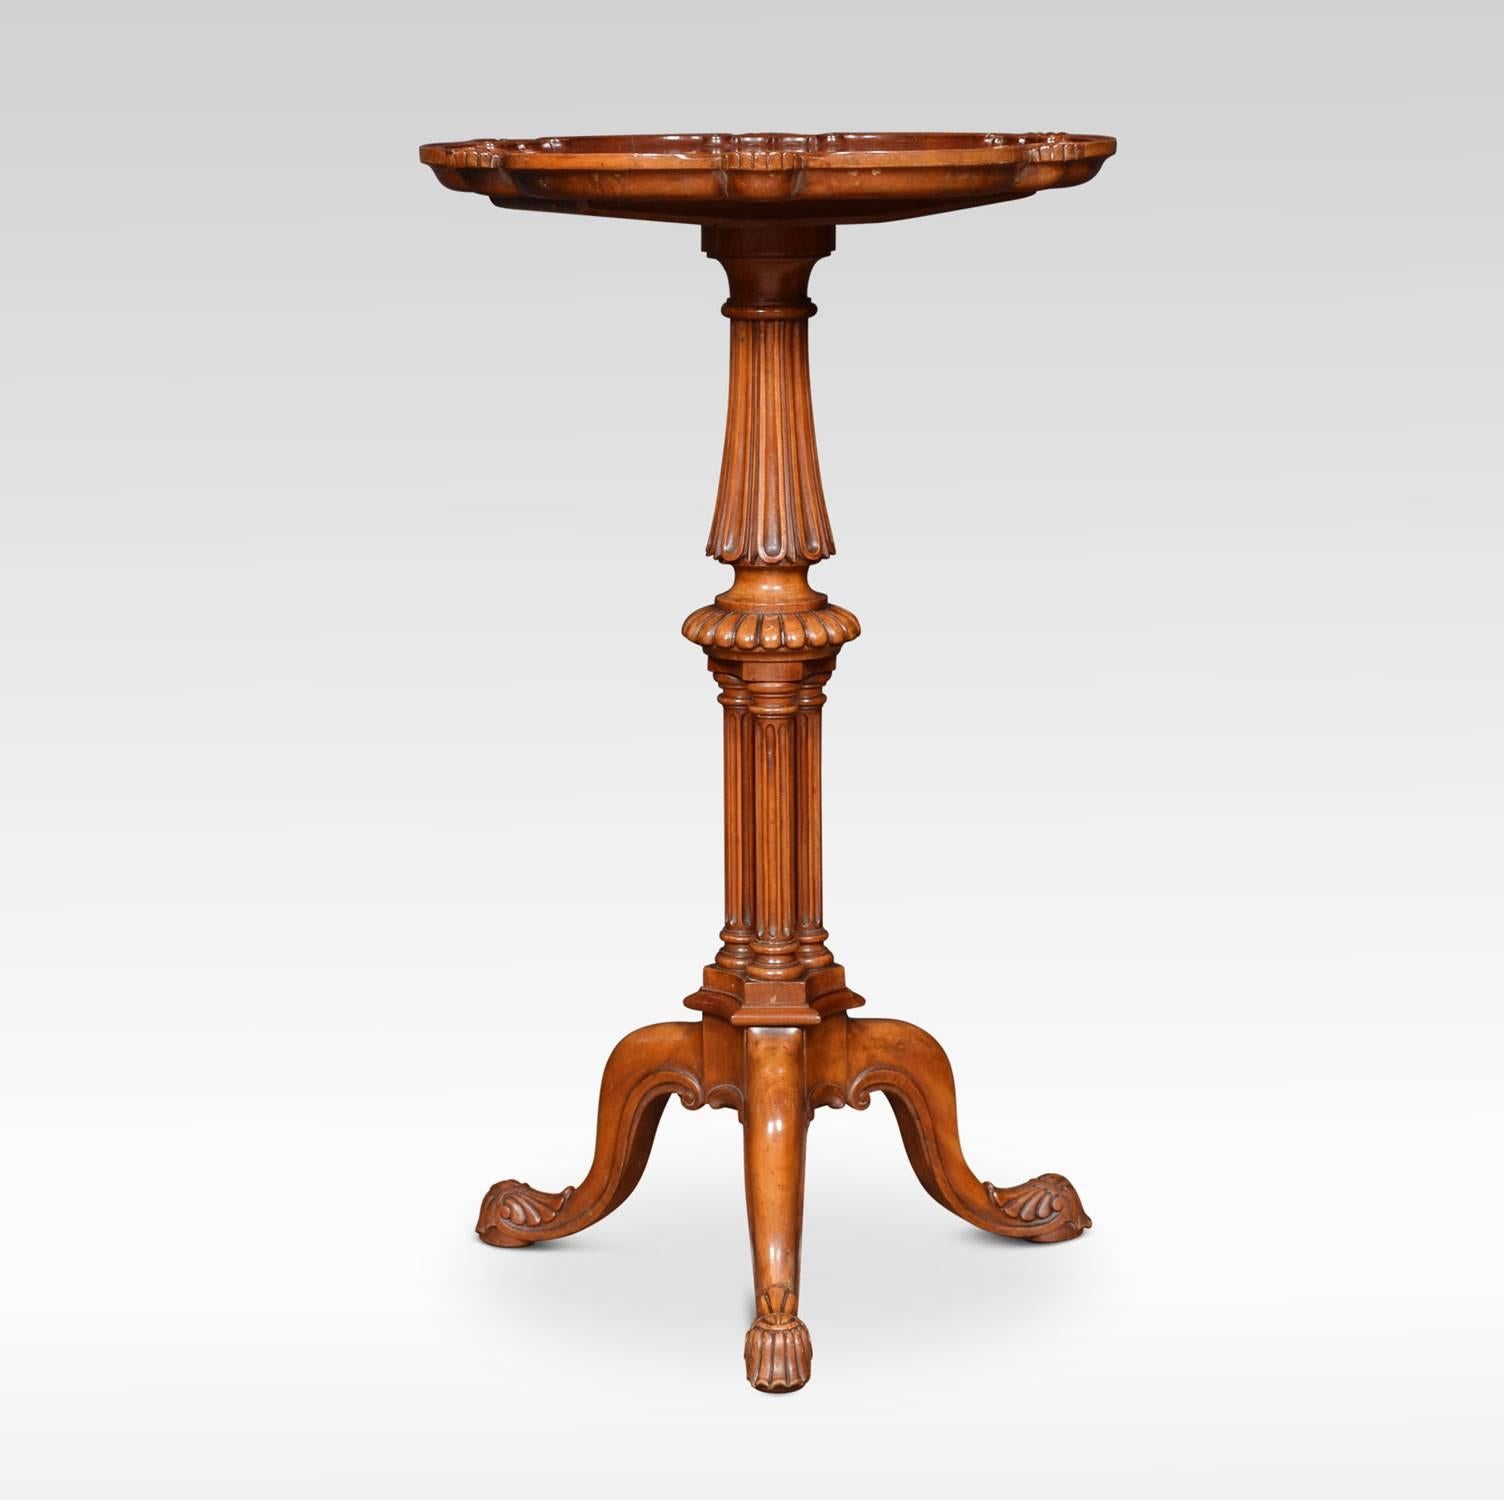 George III satinwood tri pod table in the manner of Gillows. The dished shaped round top with scalloped edge on a turned leaf carved triple cluster ringed stem and splayed tripod base with lappet carved pad feet.
Dimensions:
Height 29